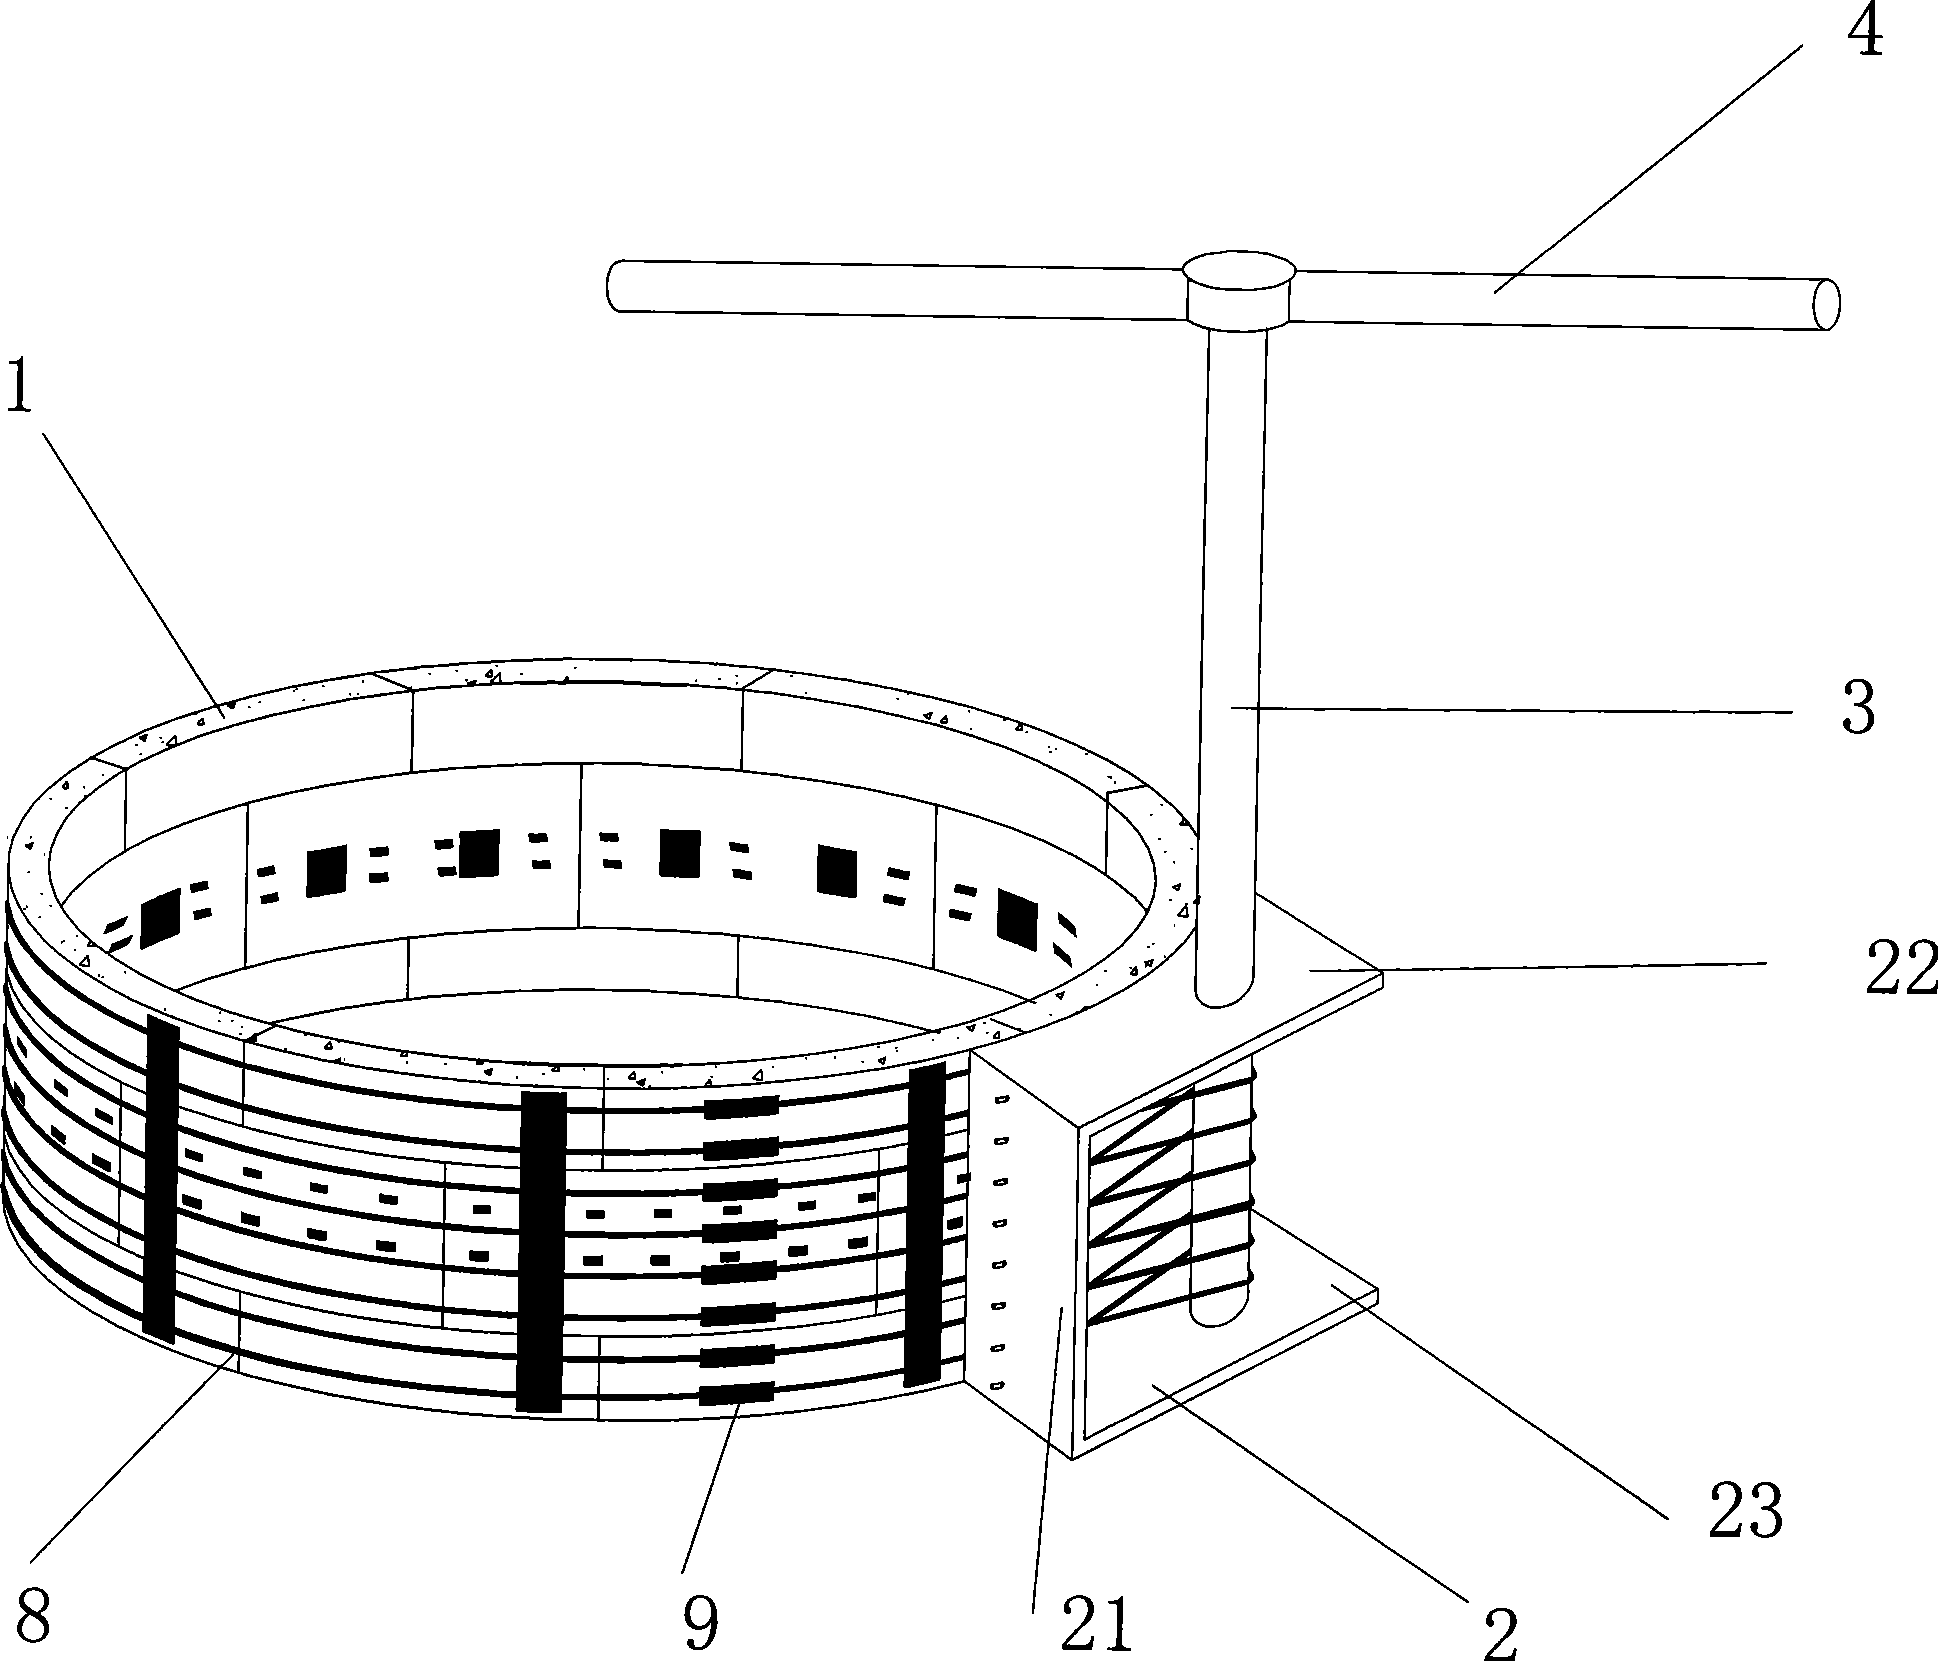 Comprehensive test system of shield tunnel construction model